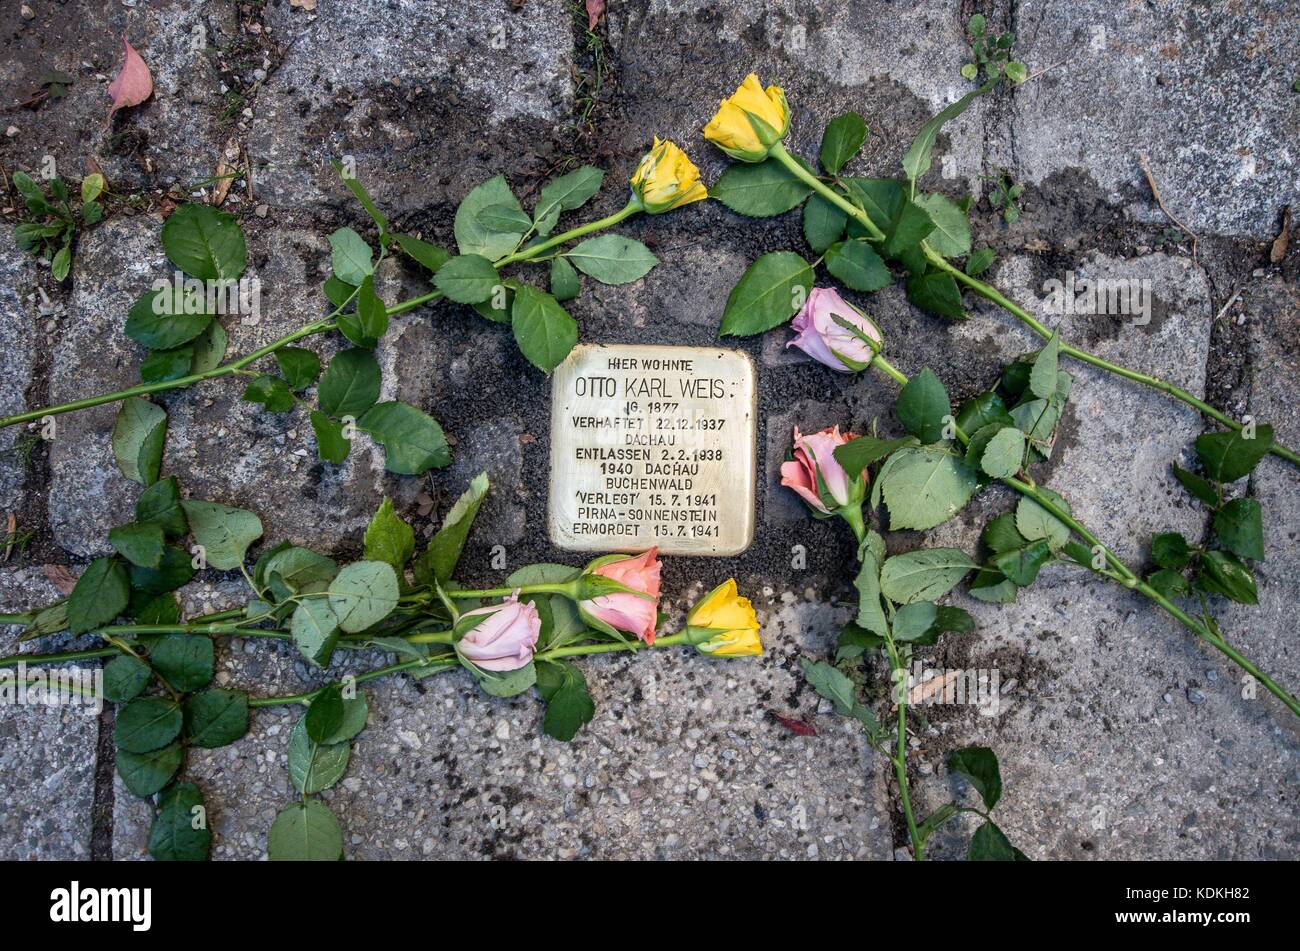 Munich, Bavaria, Germany. 14th Oct, 2017. Despite lengthy battles, the so-called Stolpersteine ('Stumbling Blocks'') containing the names & information of victims of National Socialism were installed at four different sites in Munich. The City of Munich forbid the installation of the memorial stones on public ground in 2015, which led the Stolpersteine Initiative (''˜Stumbling Block Initiative'') to seek private properties to install them. To date, 61,000 Stolpersteine in 2,000 cities in 21 countries have been dedicated, with much criticism lobbed against Munich's rejection due to Stock Photo